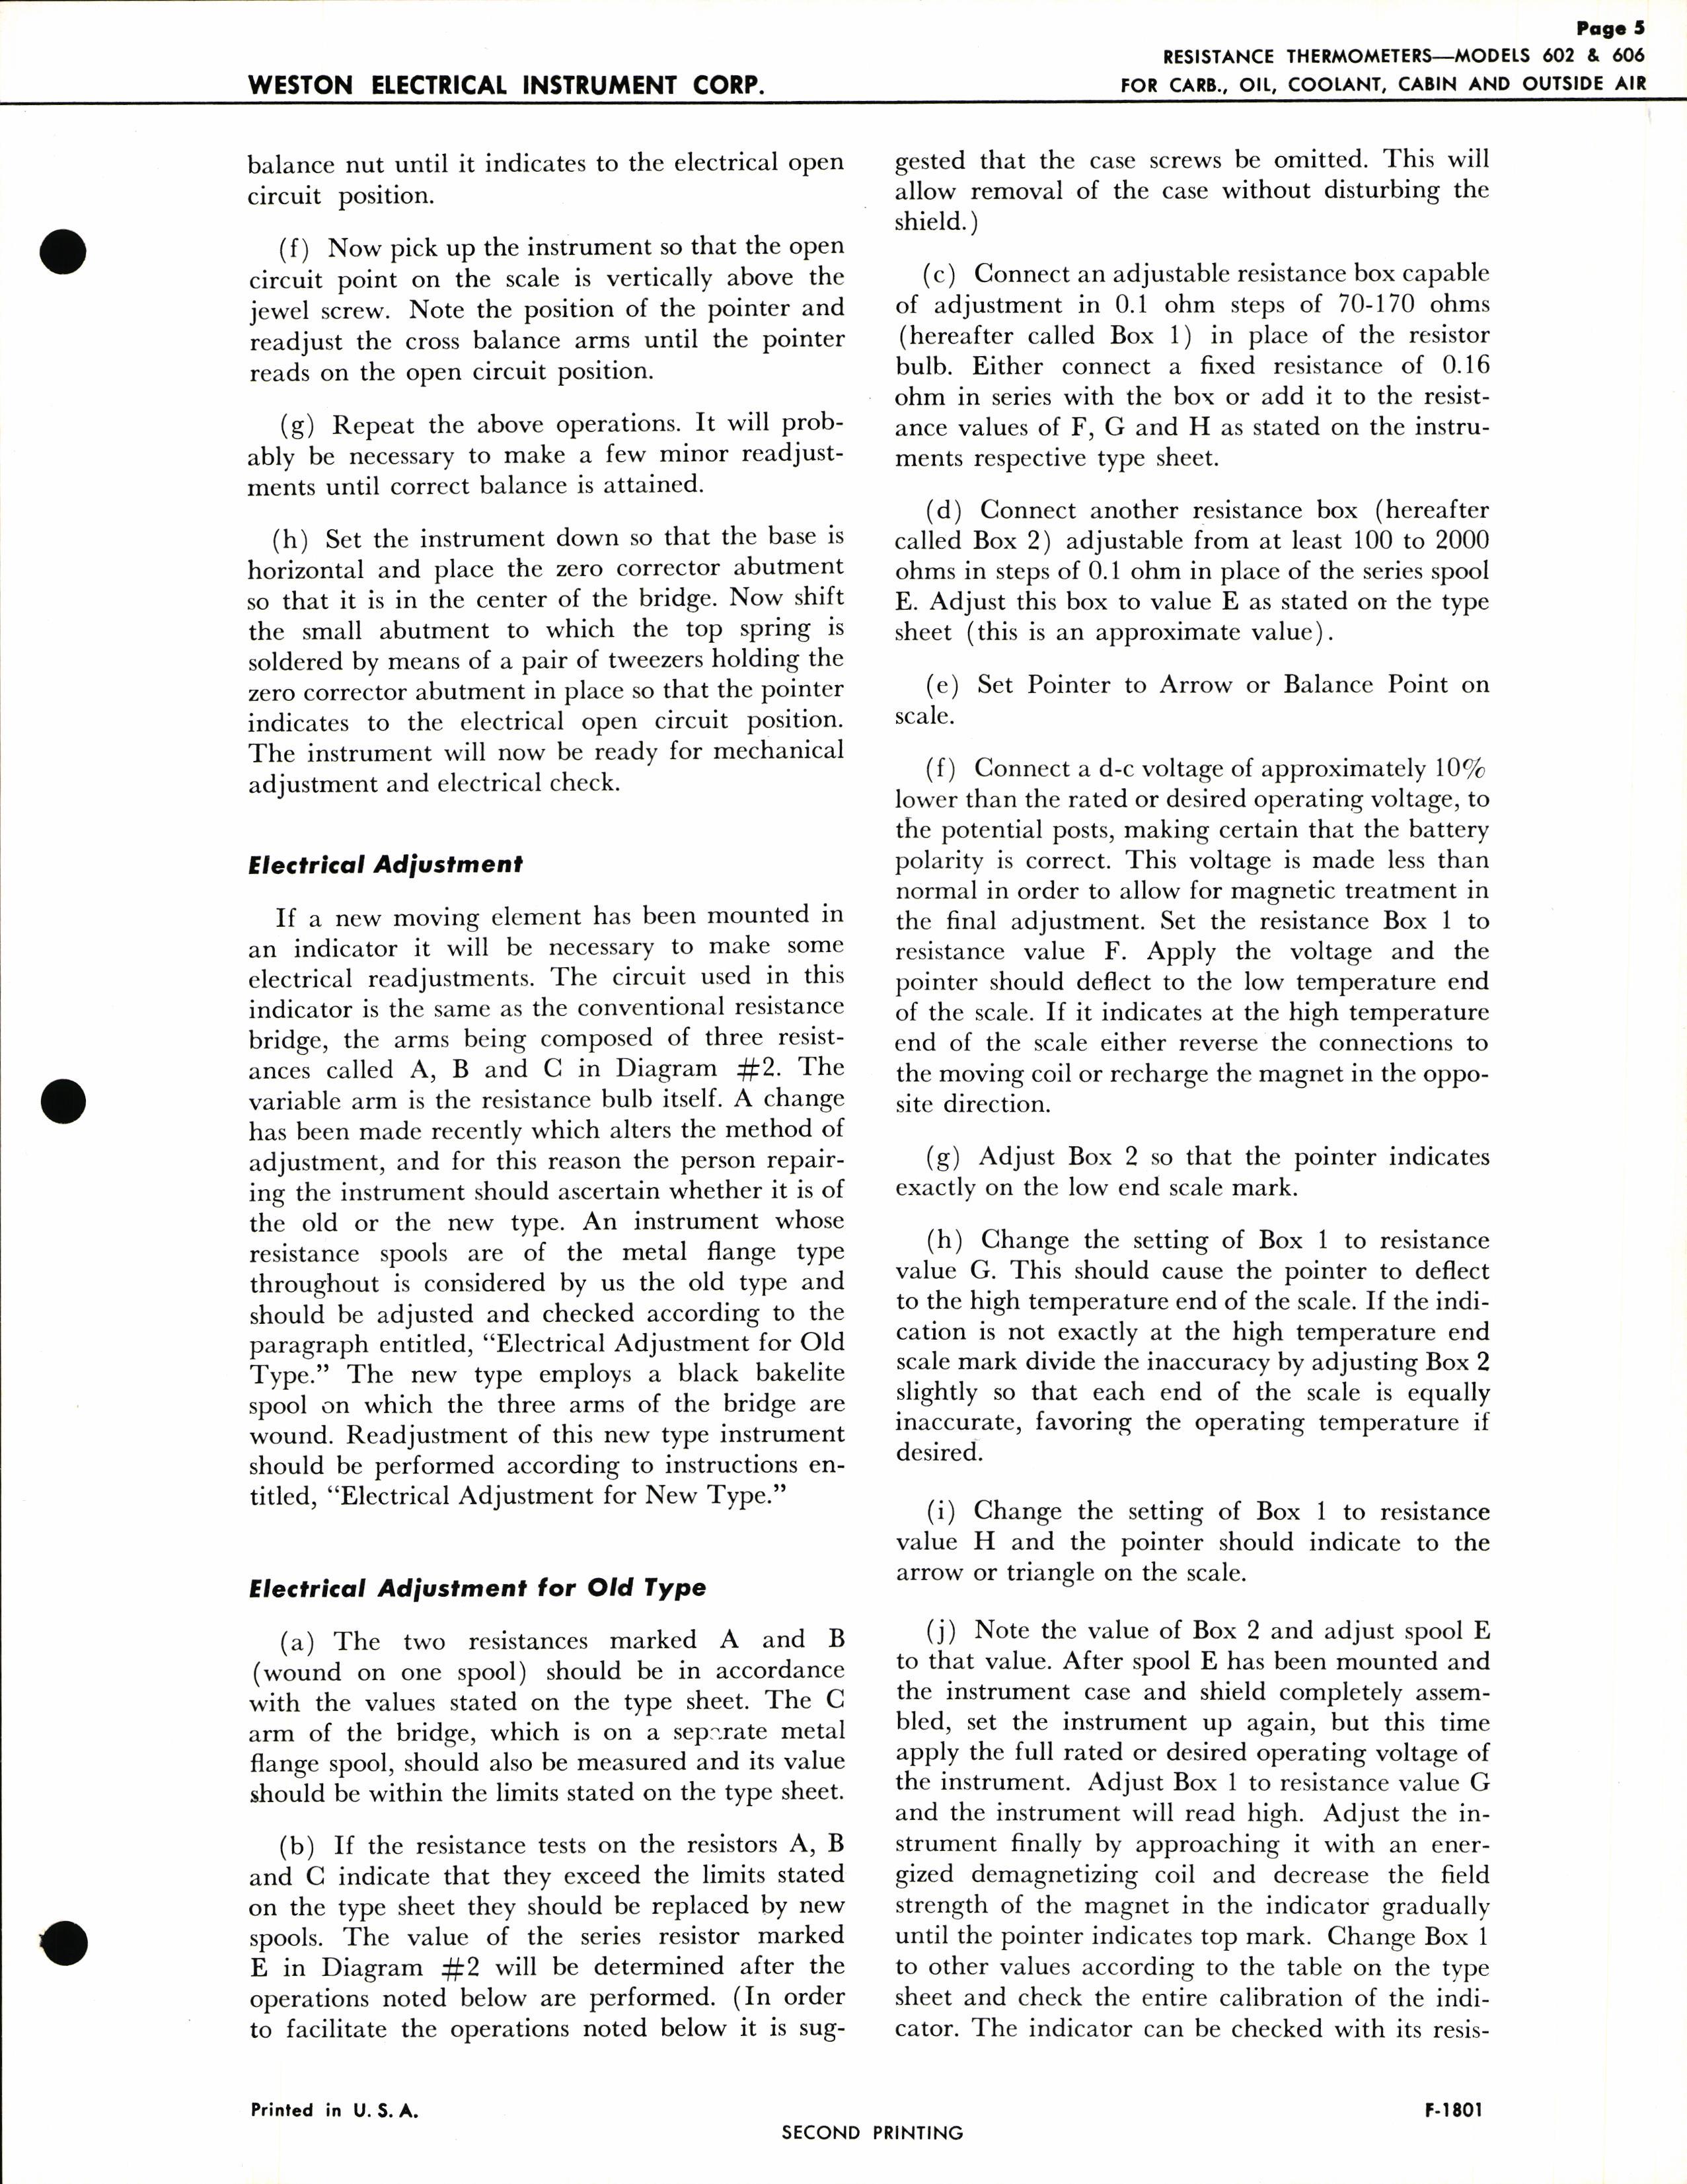 Sample page 5 from AirCorps Library document: Service Instructions for Models 602 & 606 Resistance Thermometers